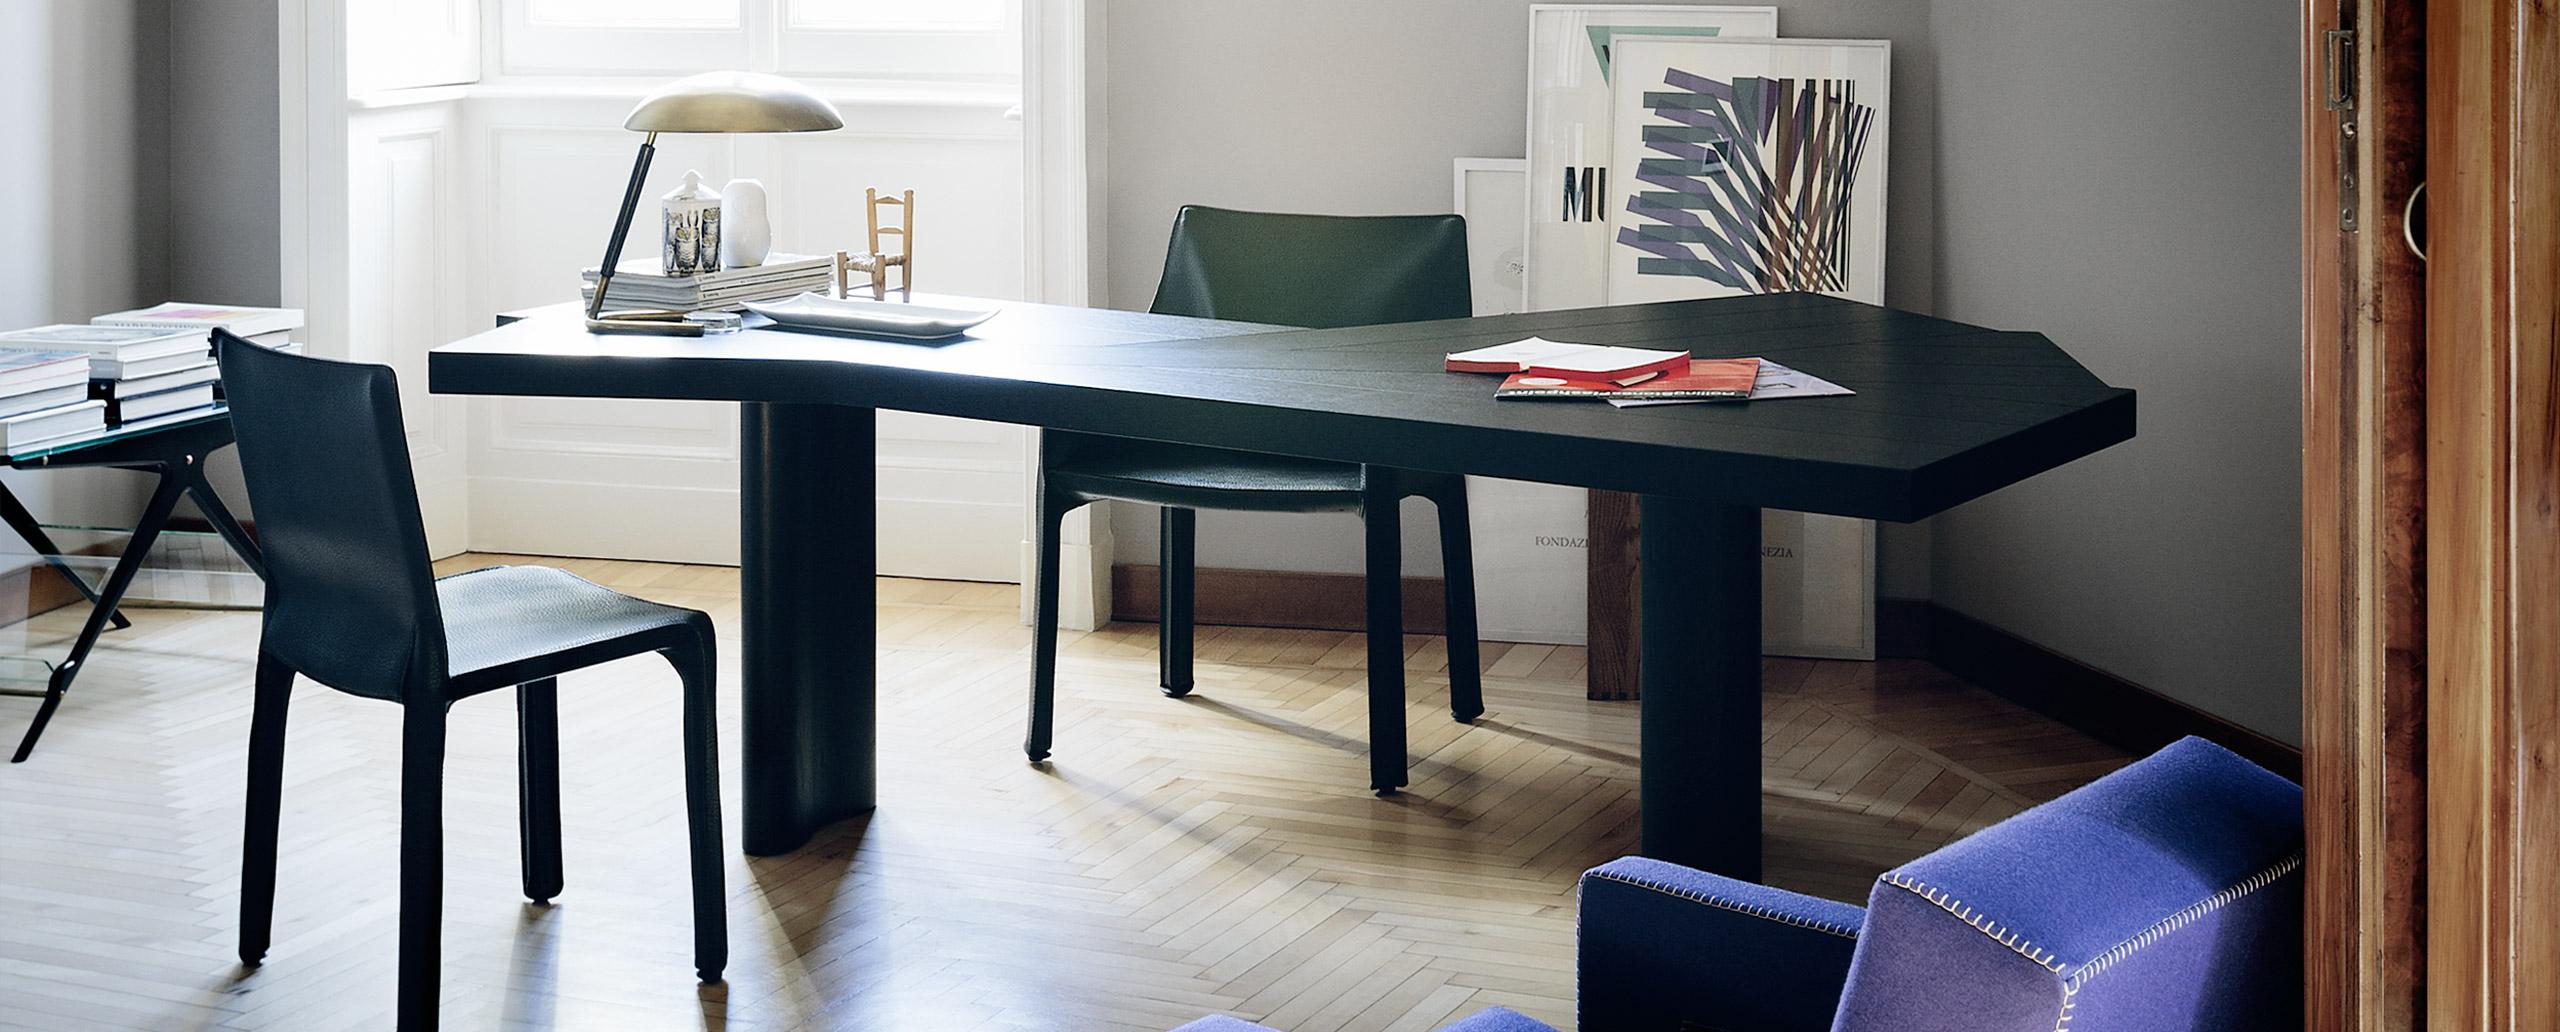 Italian Charlotte Perriand Ventaglio Wood Stained Black Table by Cassina For Sale